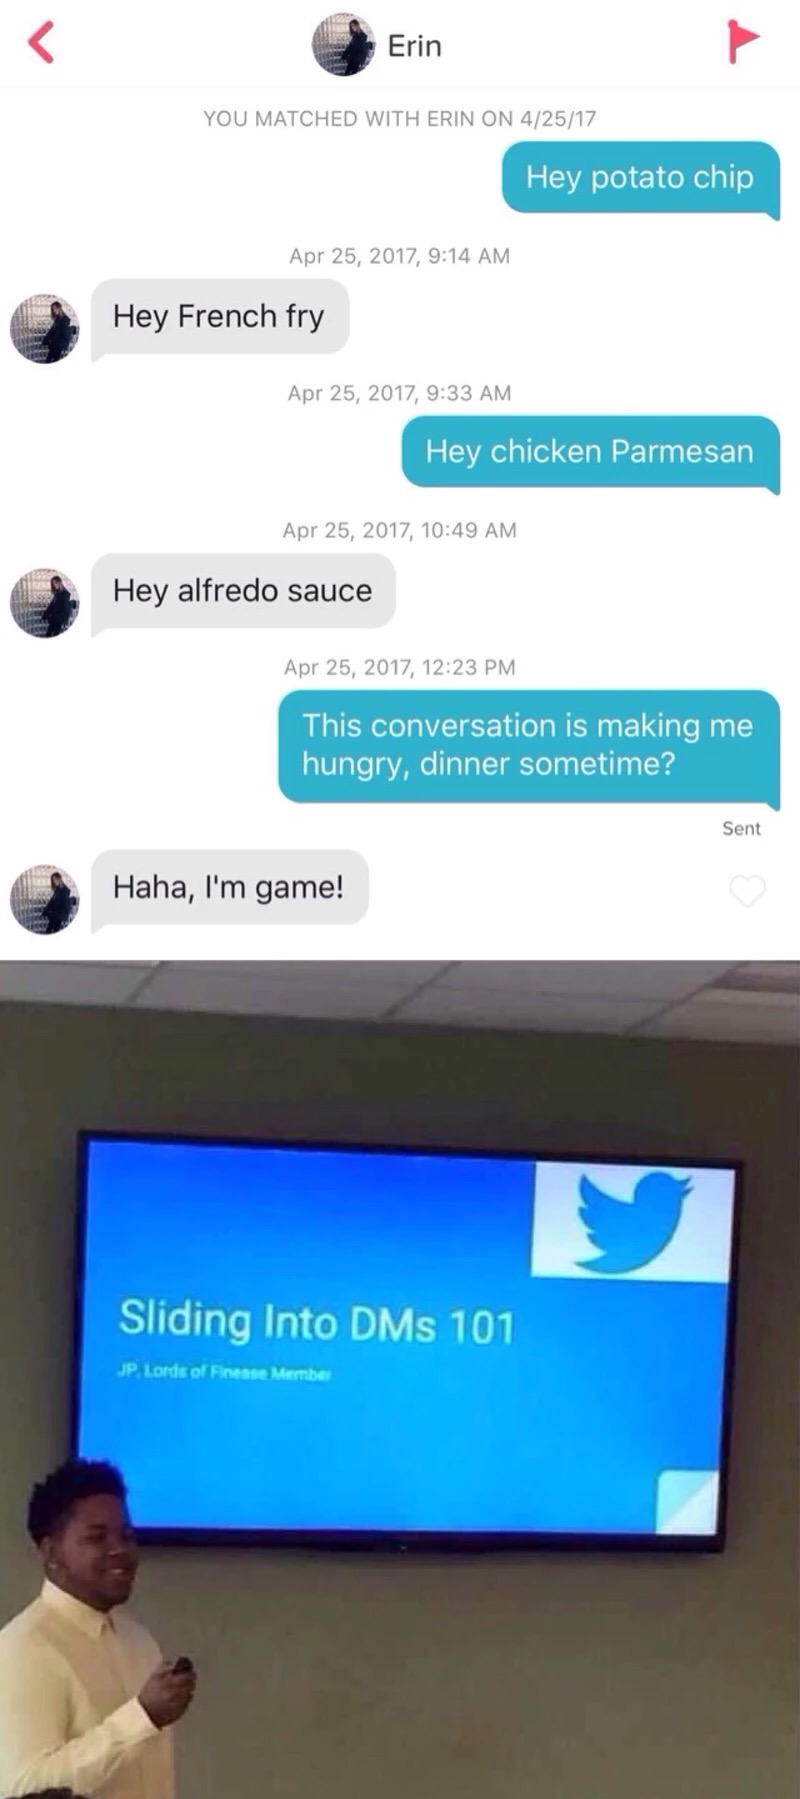 meme - sliding into the dms 101 - Erin You Matched With Erin On 42517 Hey potato chip , Hey French fry , Hey chicken Parmesan , Hey alfredo sauce , This conversation is making me hungry, dinner sometime? Sent Haha, I'm game! Sliding Into DMs 101 Jp Lords 